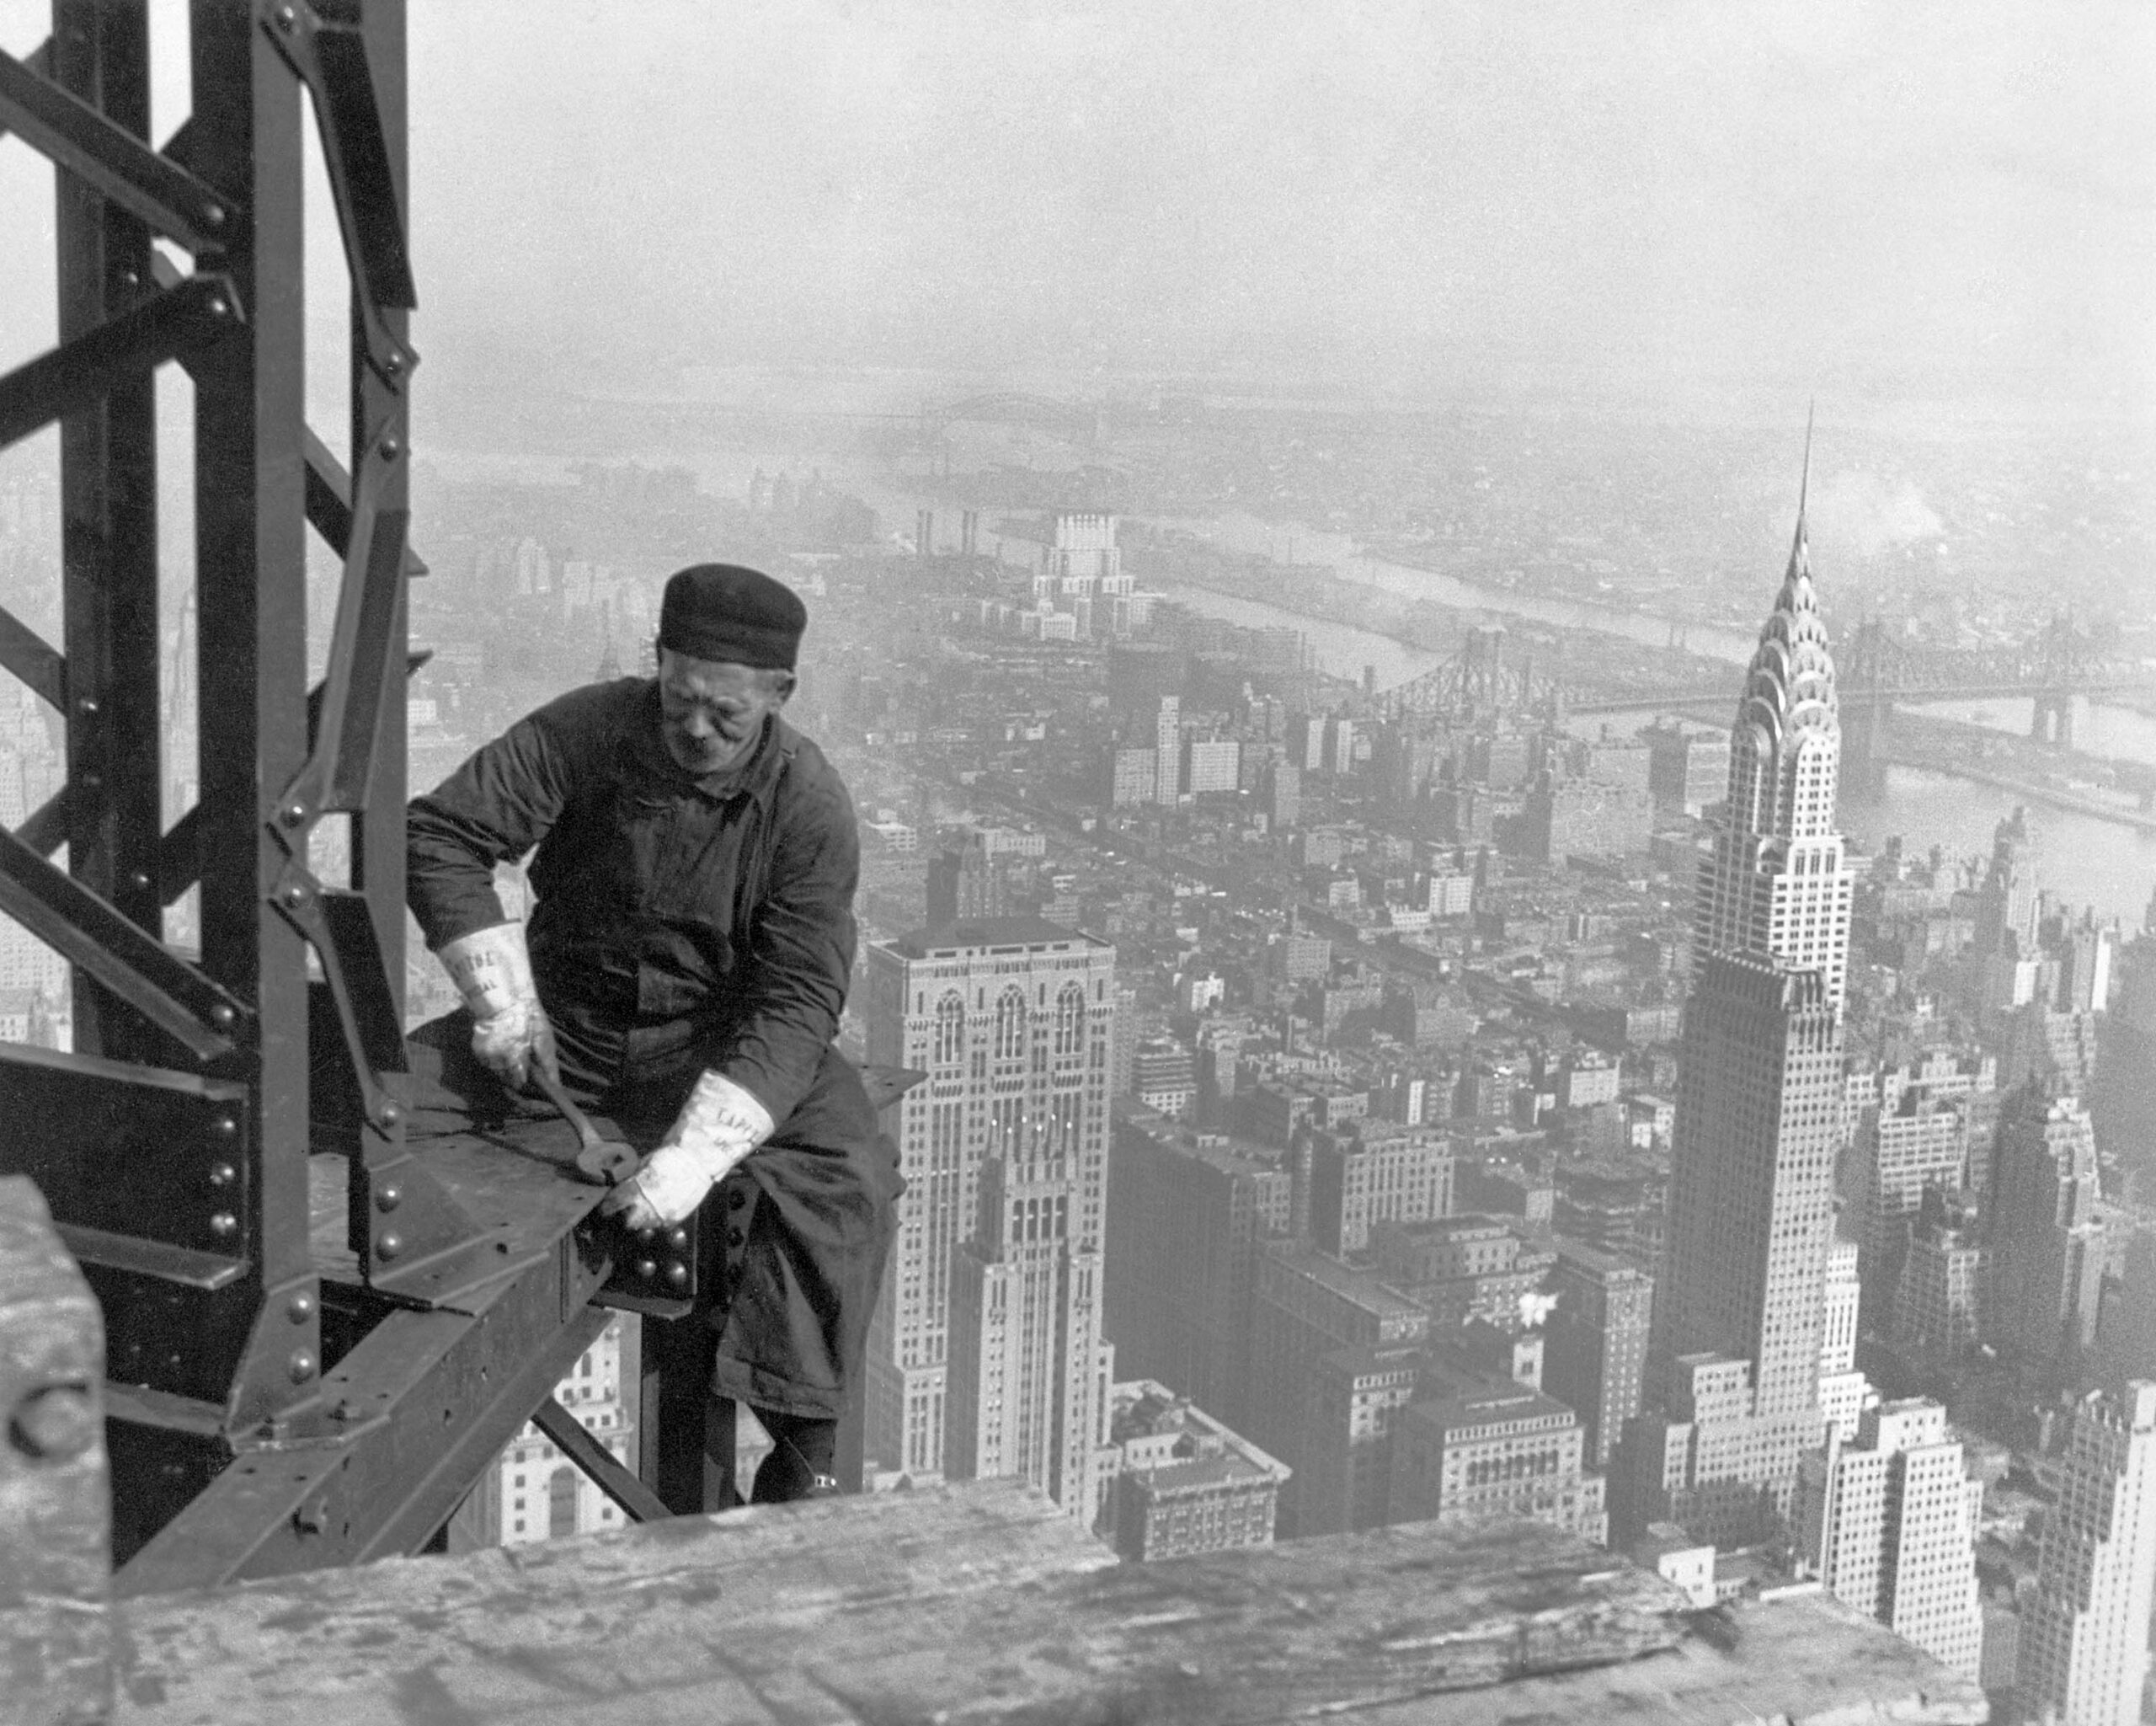 25 amazing photos of the construction of the Empire State Building